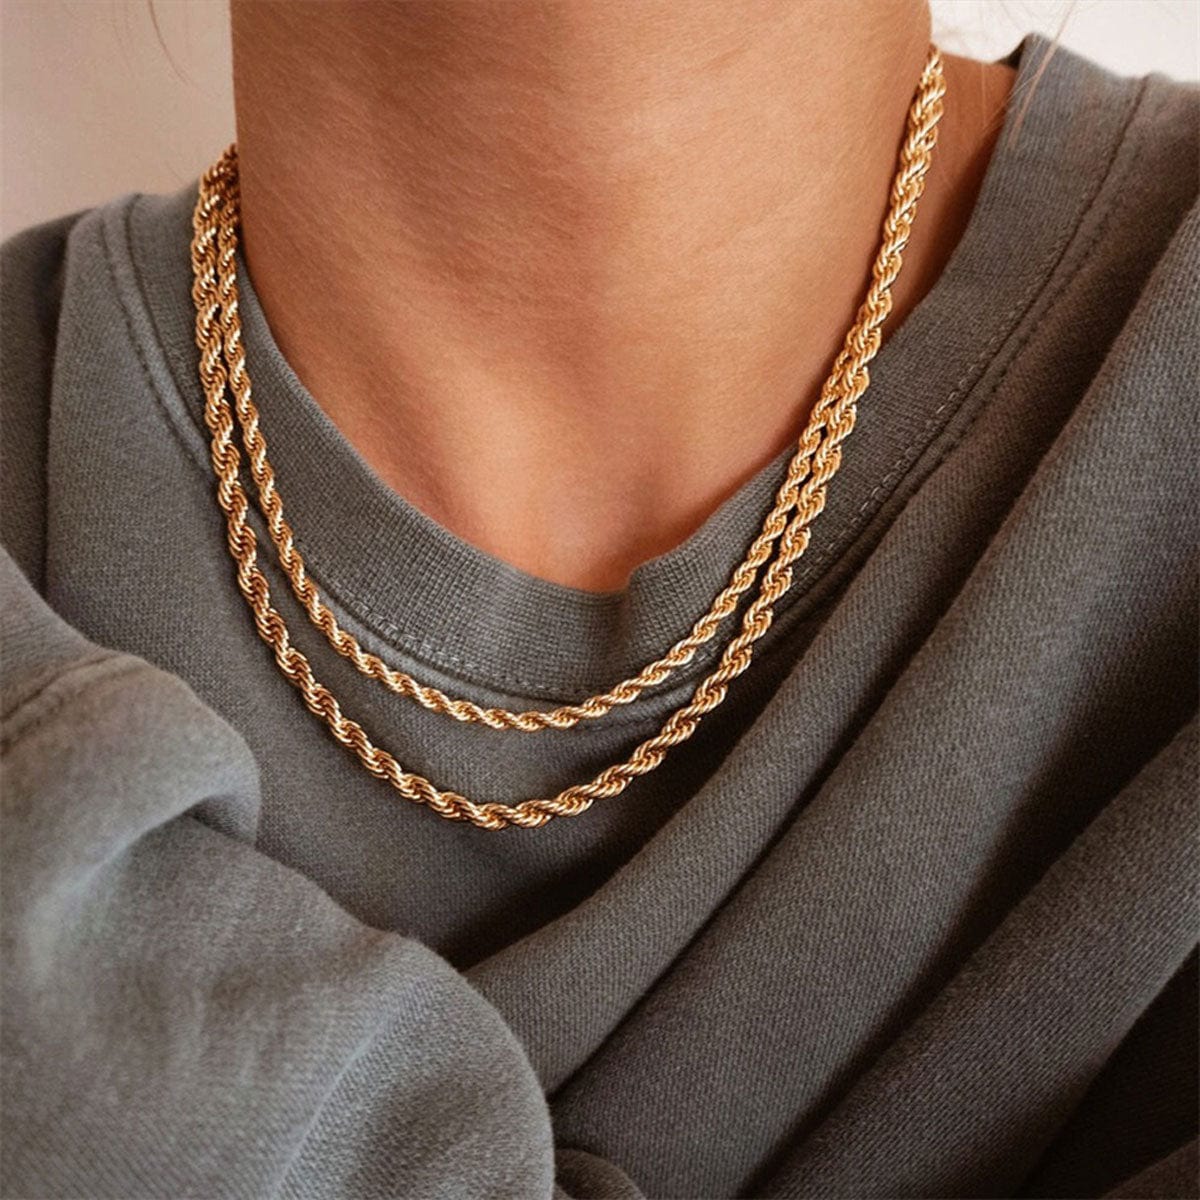 Twisted Rope Chain Necklace gold model | MILK MONEY milkmoney.co | cute necklaces. pretty necklaces. trendy necklaces. cute simple necklaces. cute gold necklace. cute cheap necklaces. cute necklaces for women. trendy layered necklaces. casual necklace. cute trendy necklaces